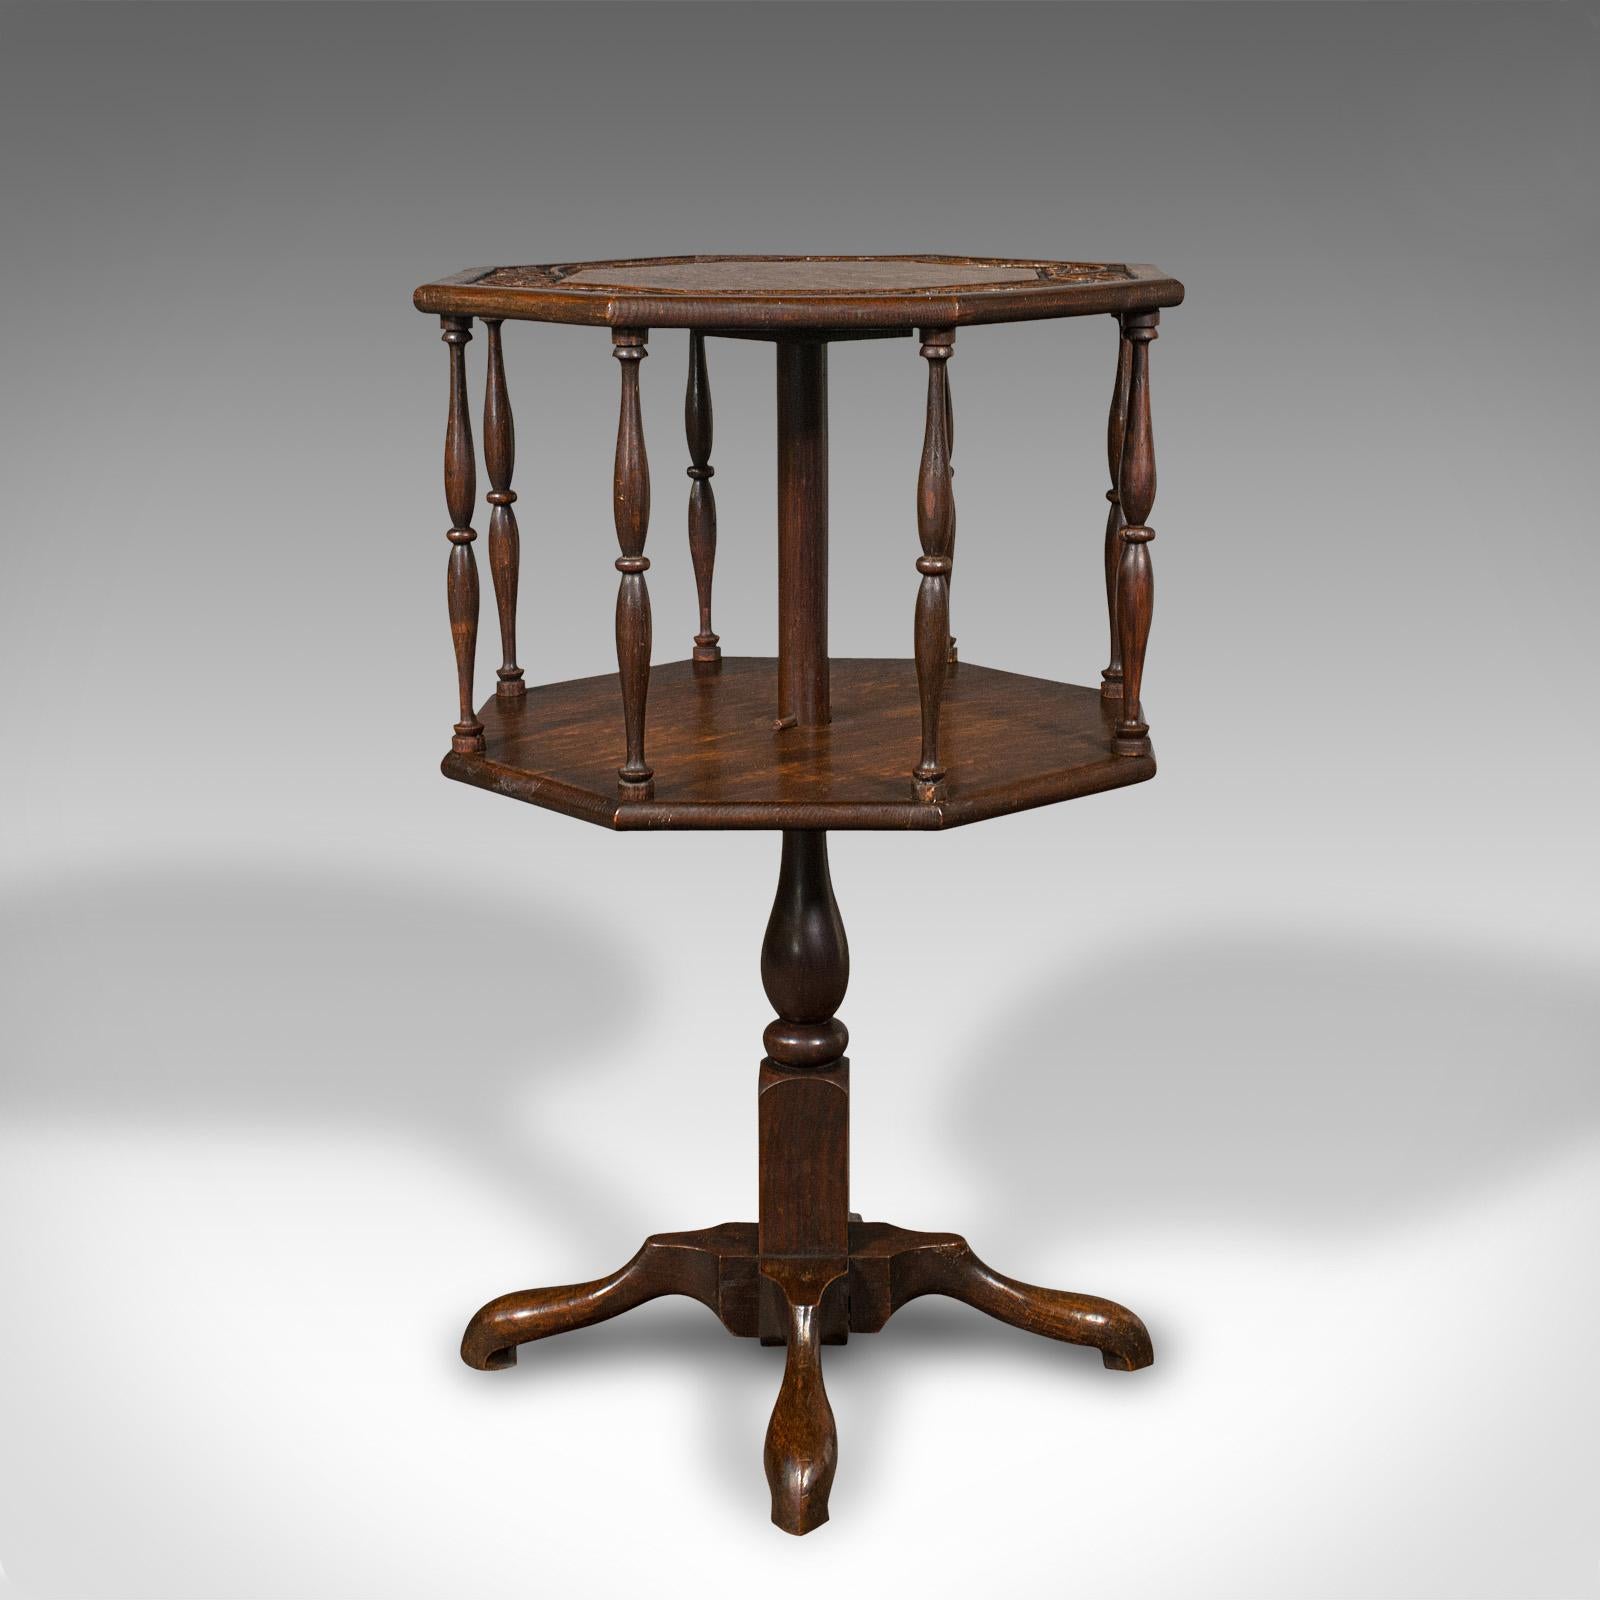 This is an antique octagonal occasional table. An English, oak rotating two-tier book shelf in the Arts & Crafts taste, dating to the late Victorian period, circa 1890.

Versatile and attractive addition to the lounge or reading nook
Displays a